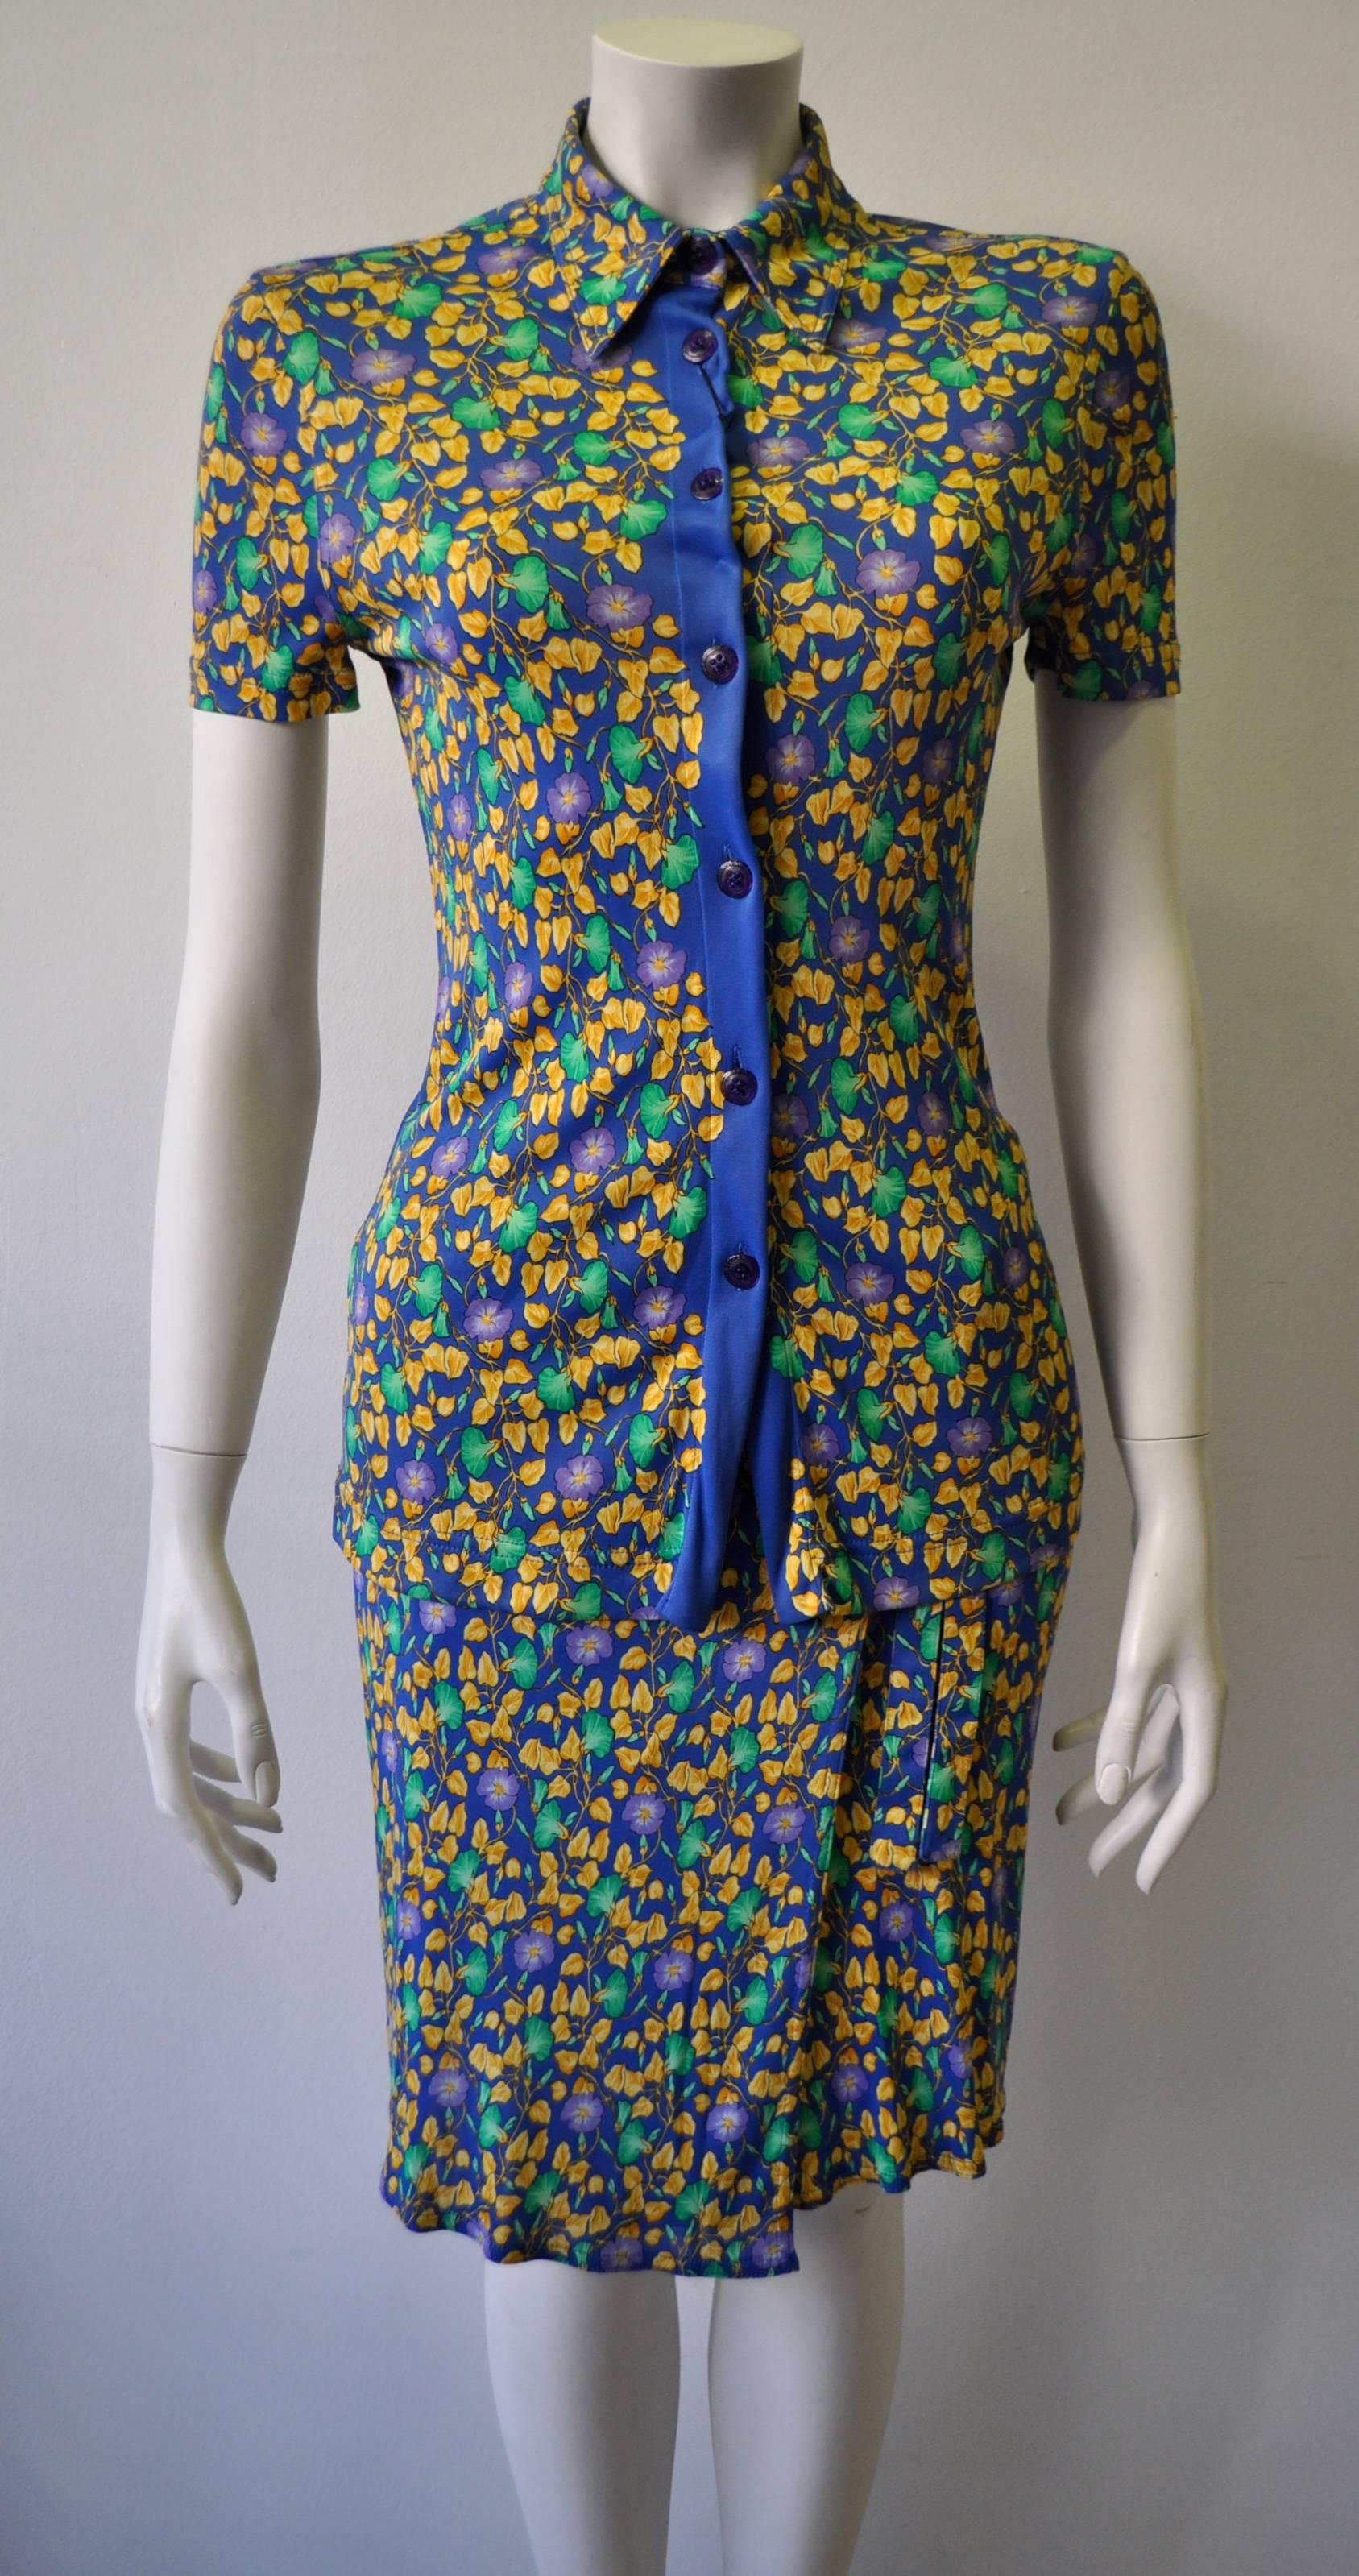 Gianni Versace Istante Original Floral Short Sleeve Top and Wrap Skirt Ensemble